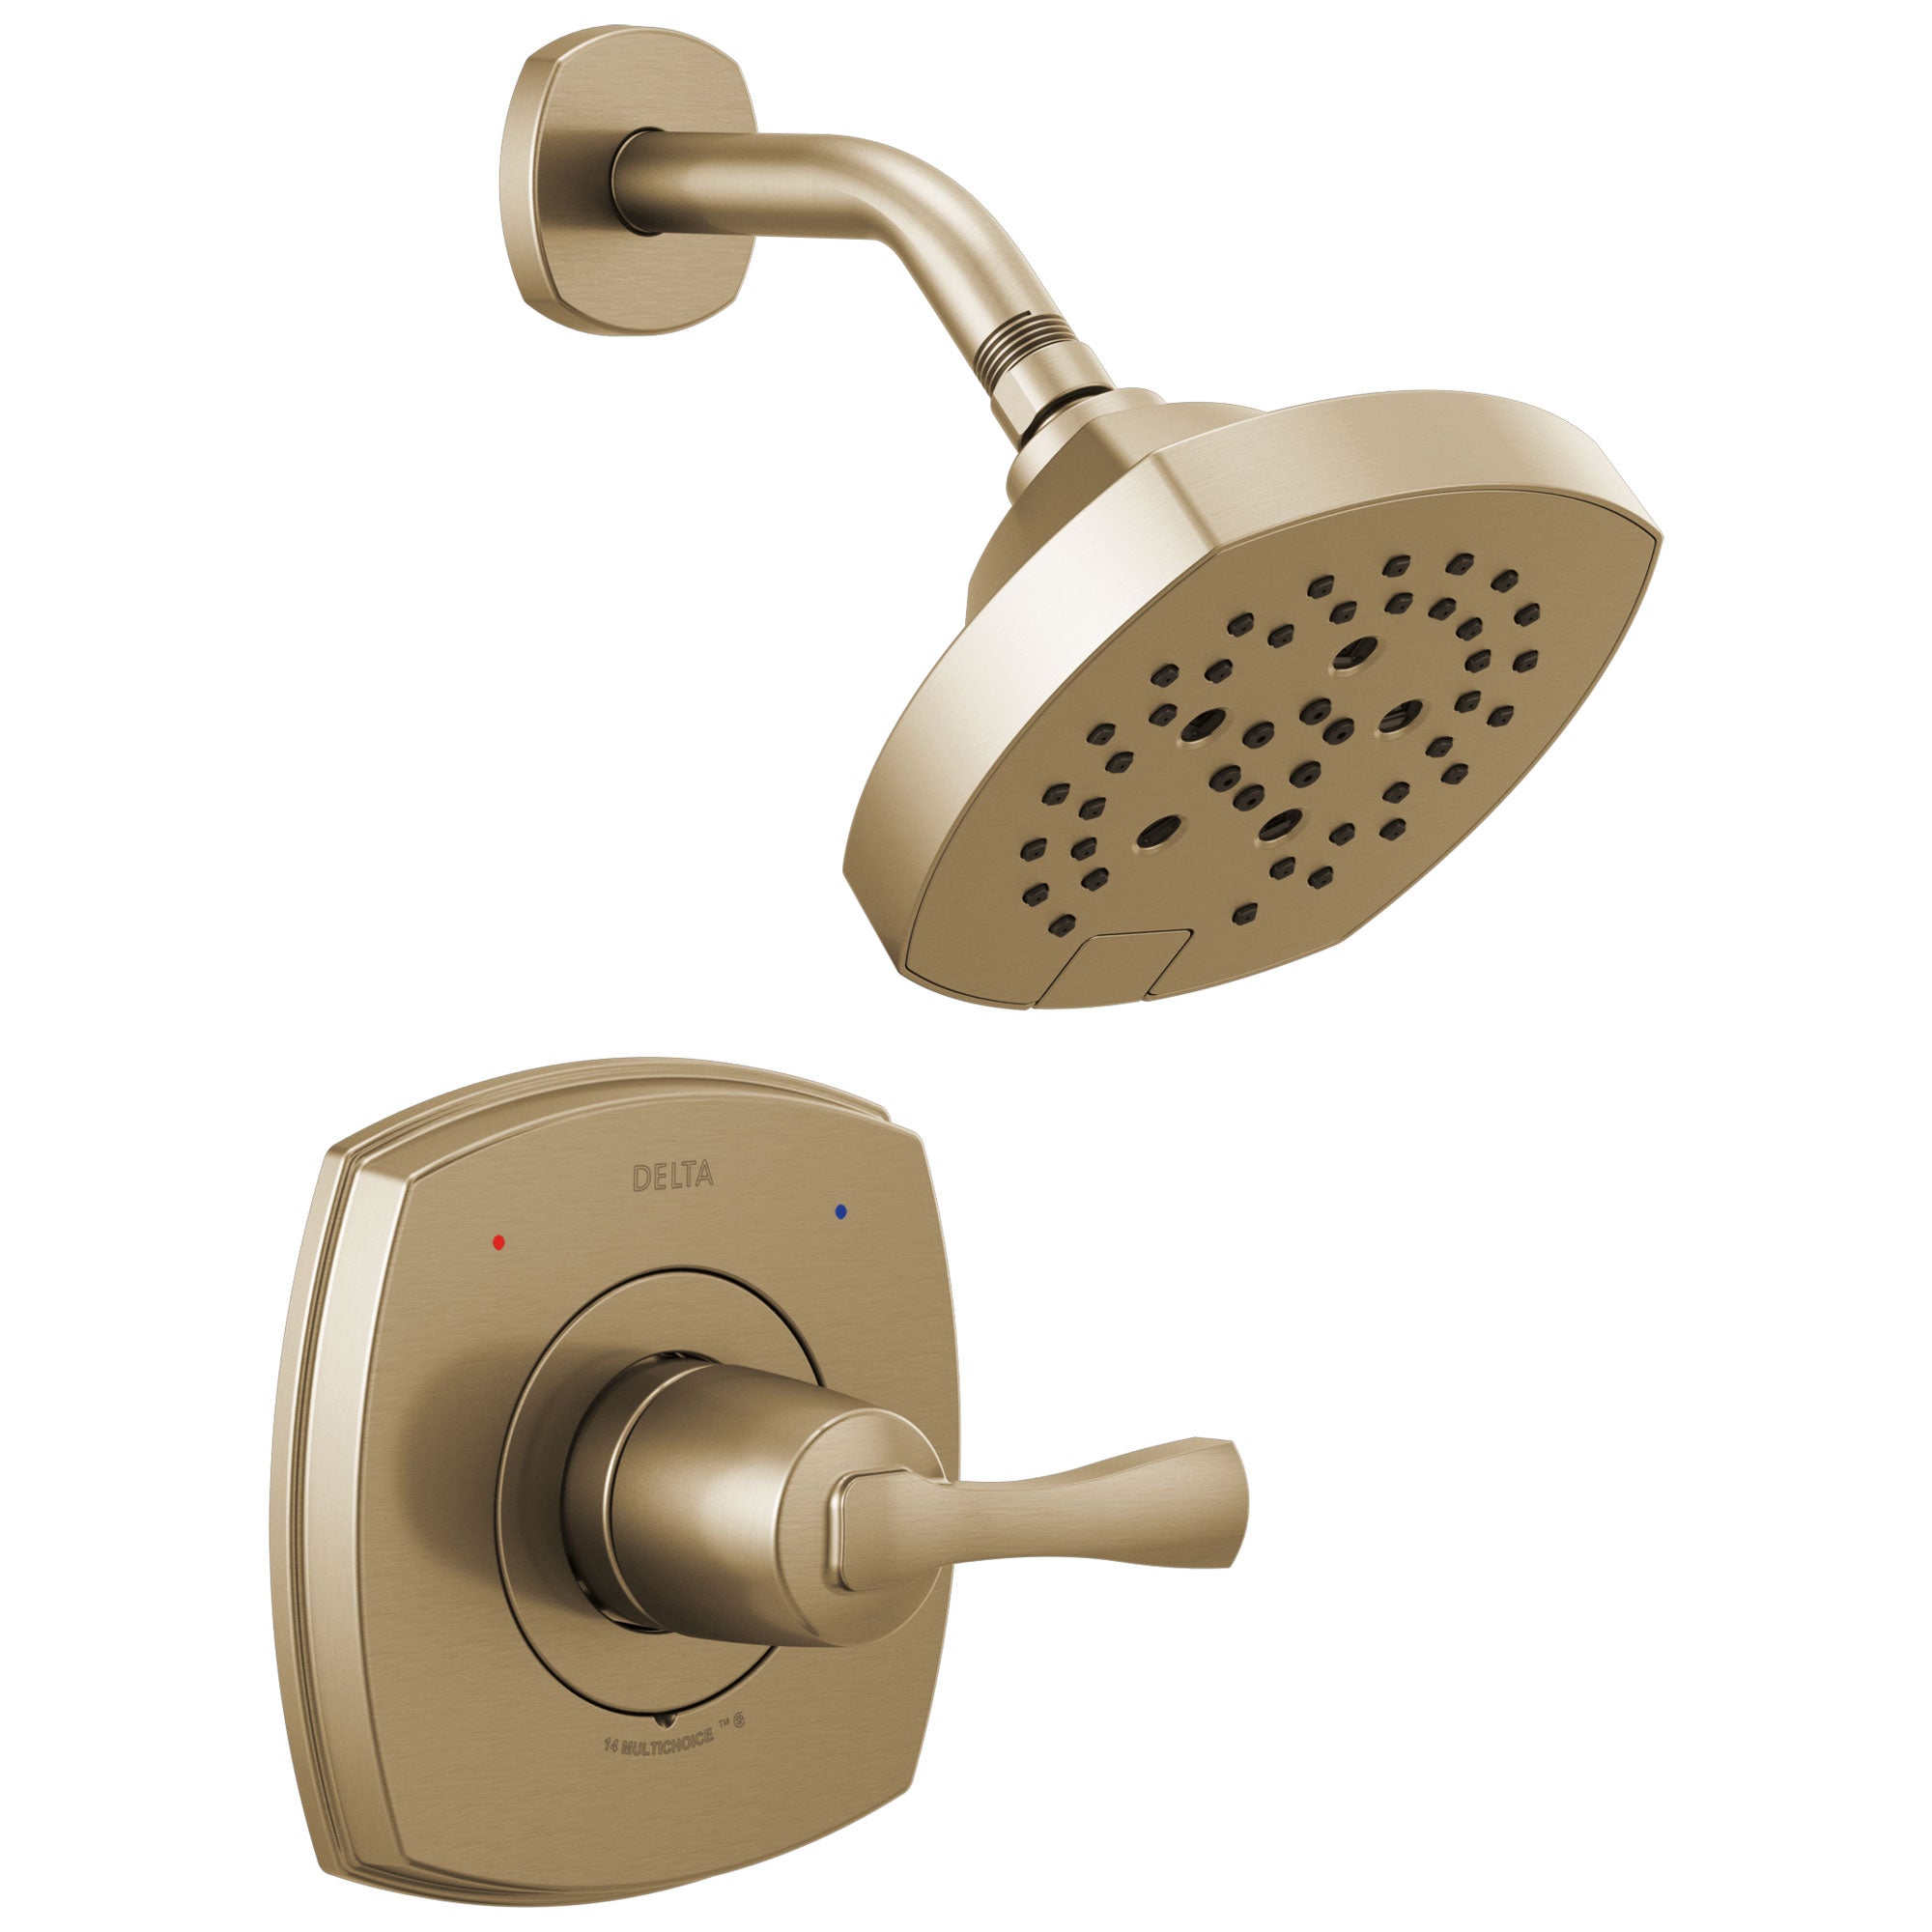 Delta Stryke Champagne Bronze Finish 14 Series Shower Only Faucet Includes Single Lever Handle, Cartridge, and Rough-in Valve with Stops D3490V